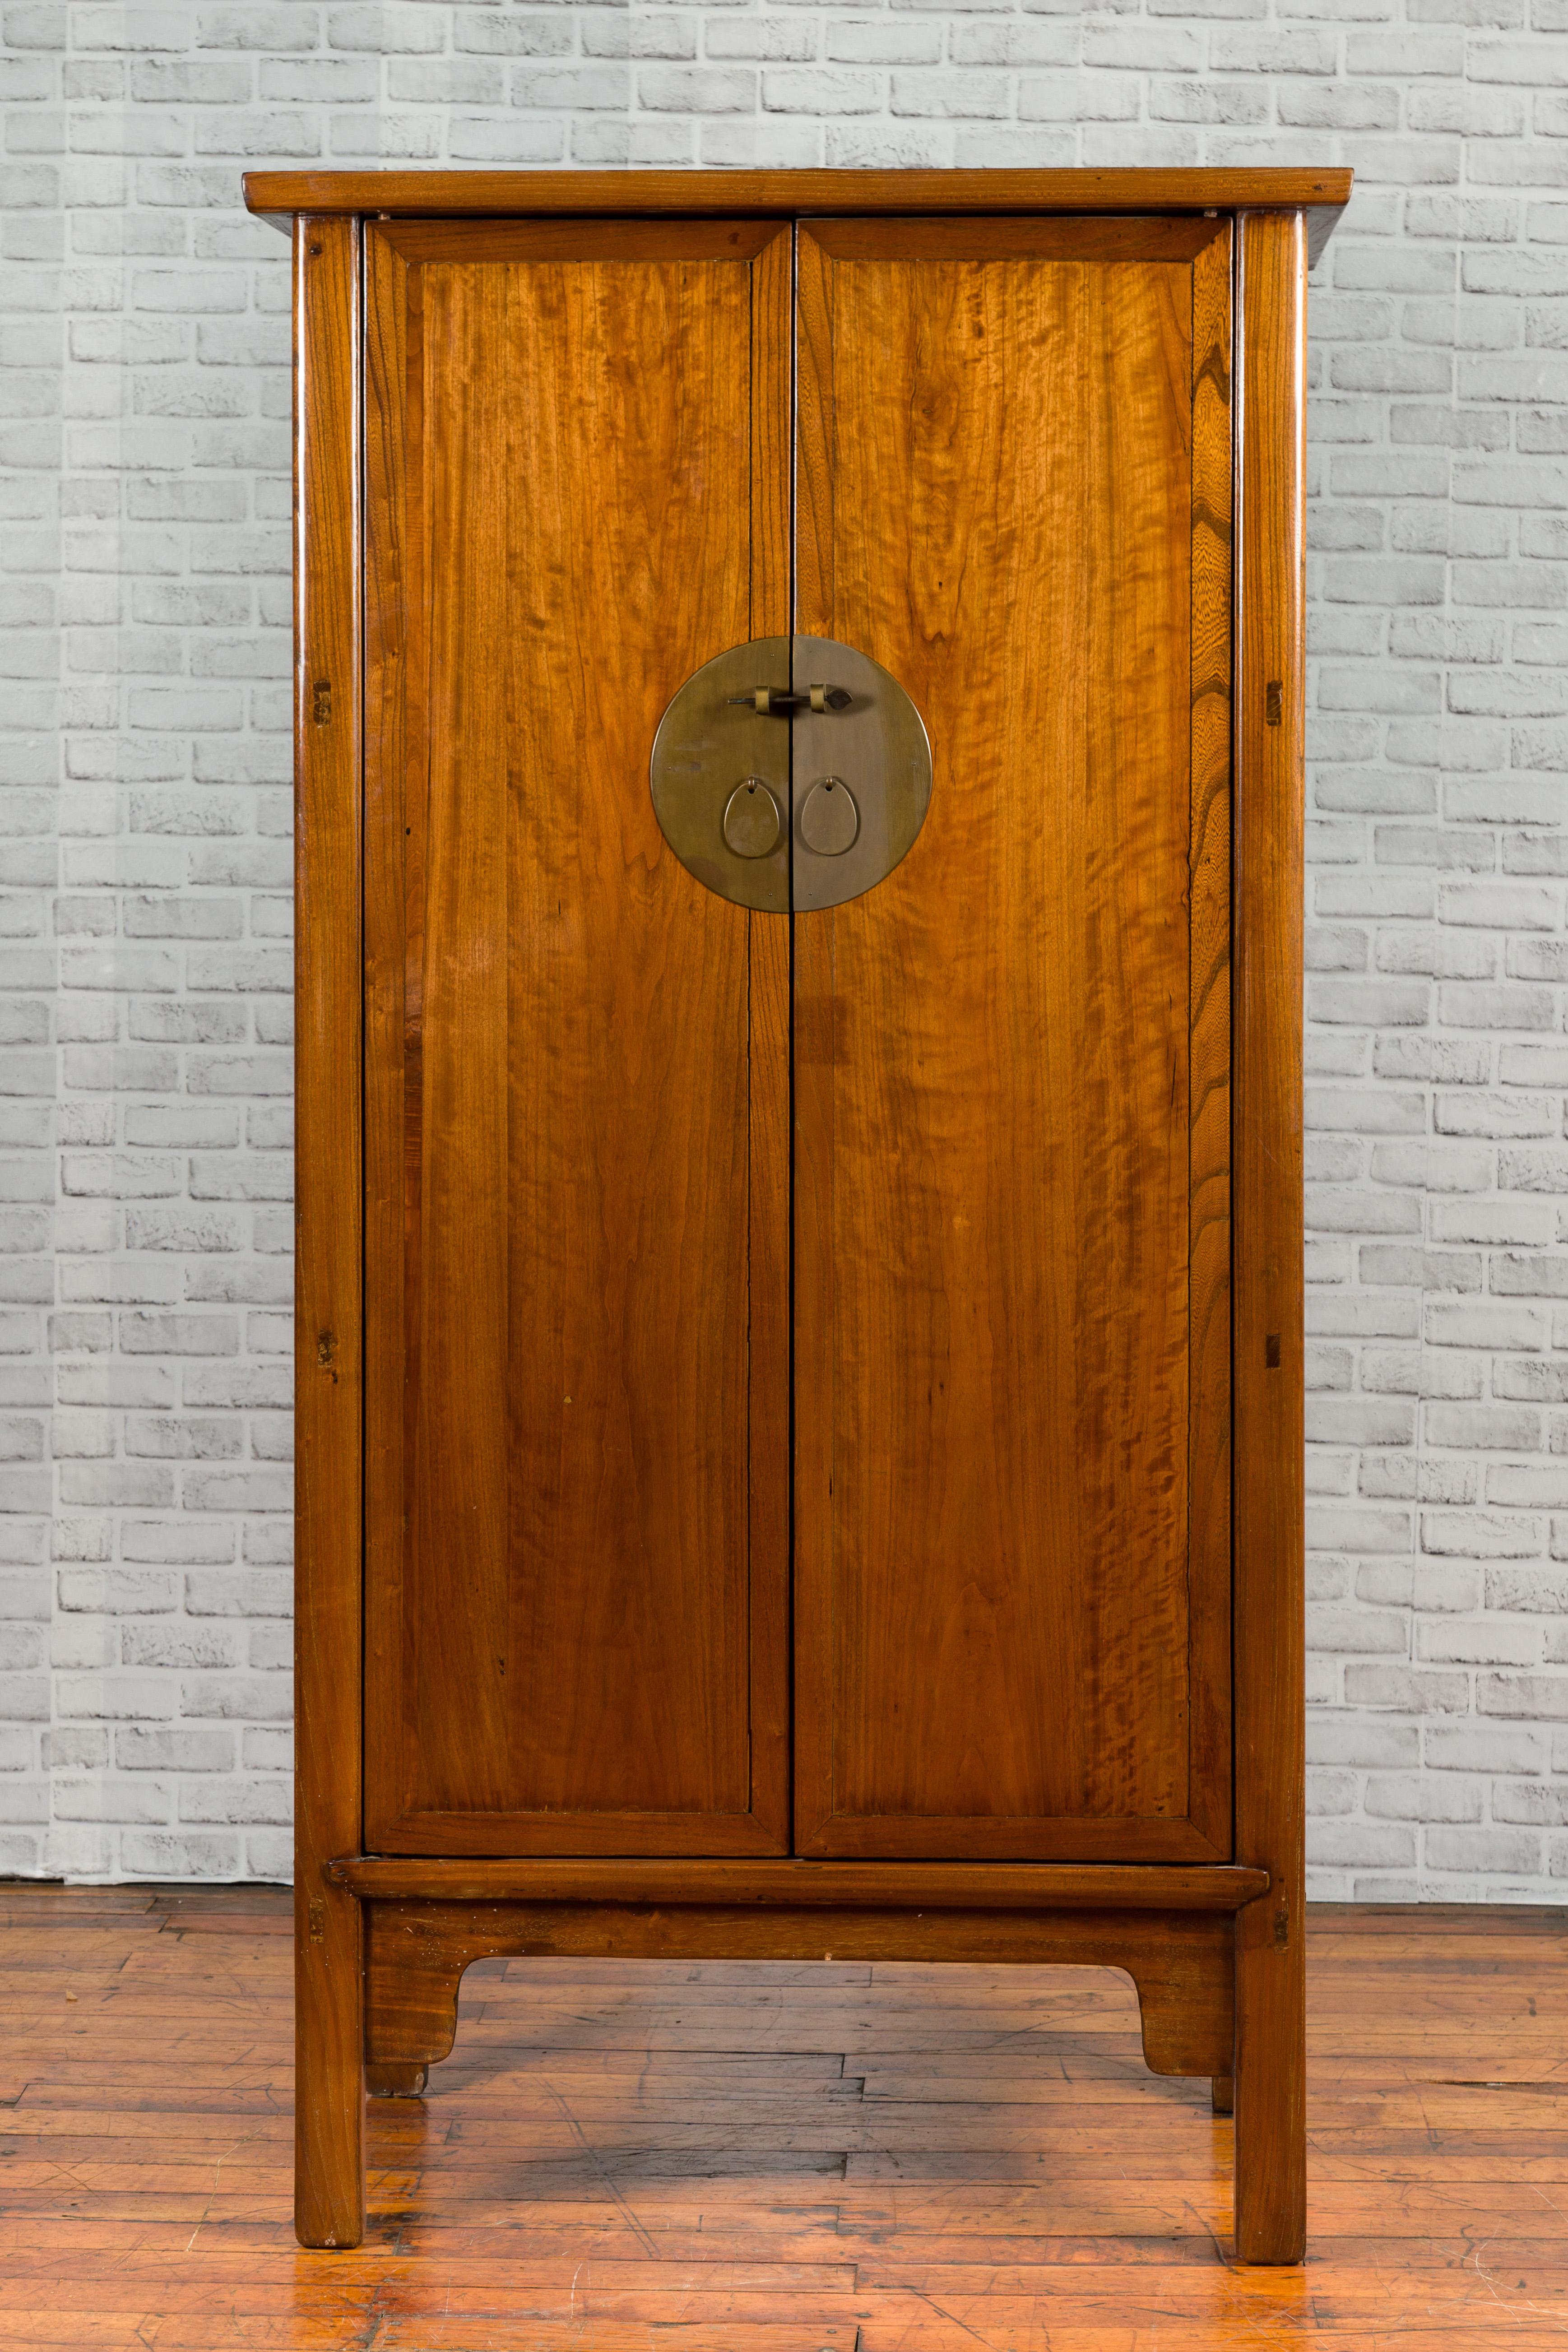 A Chinese elmwood noodle cabinet from the early 20th century, with four hidden graduated drawers and light brown lacquer. Created in China during the early years of the 20th century, this noodle cabinet features a linear silhouette perfectly